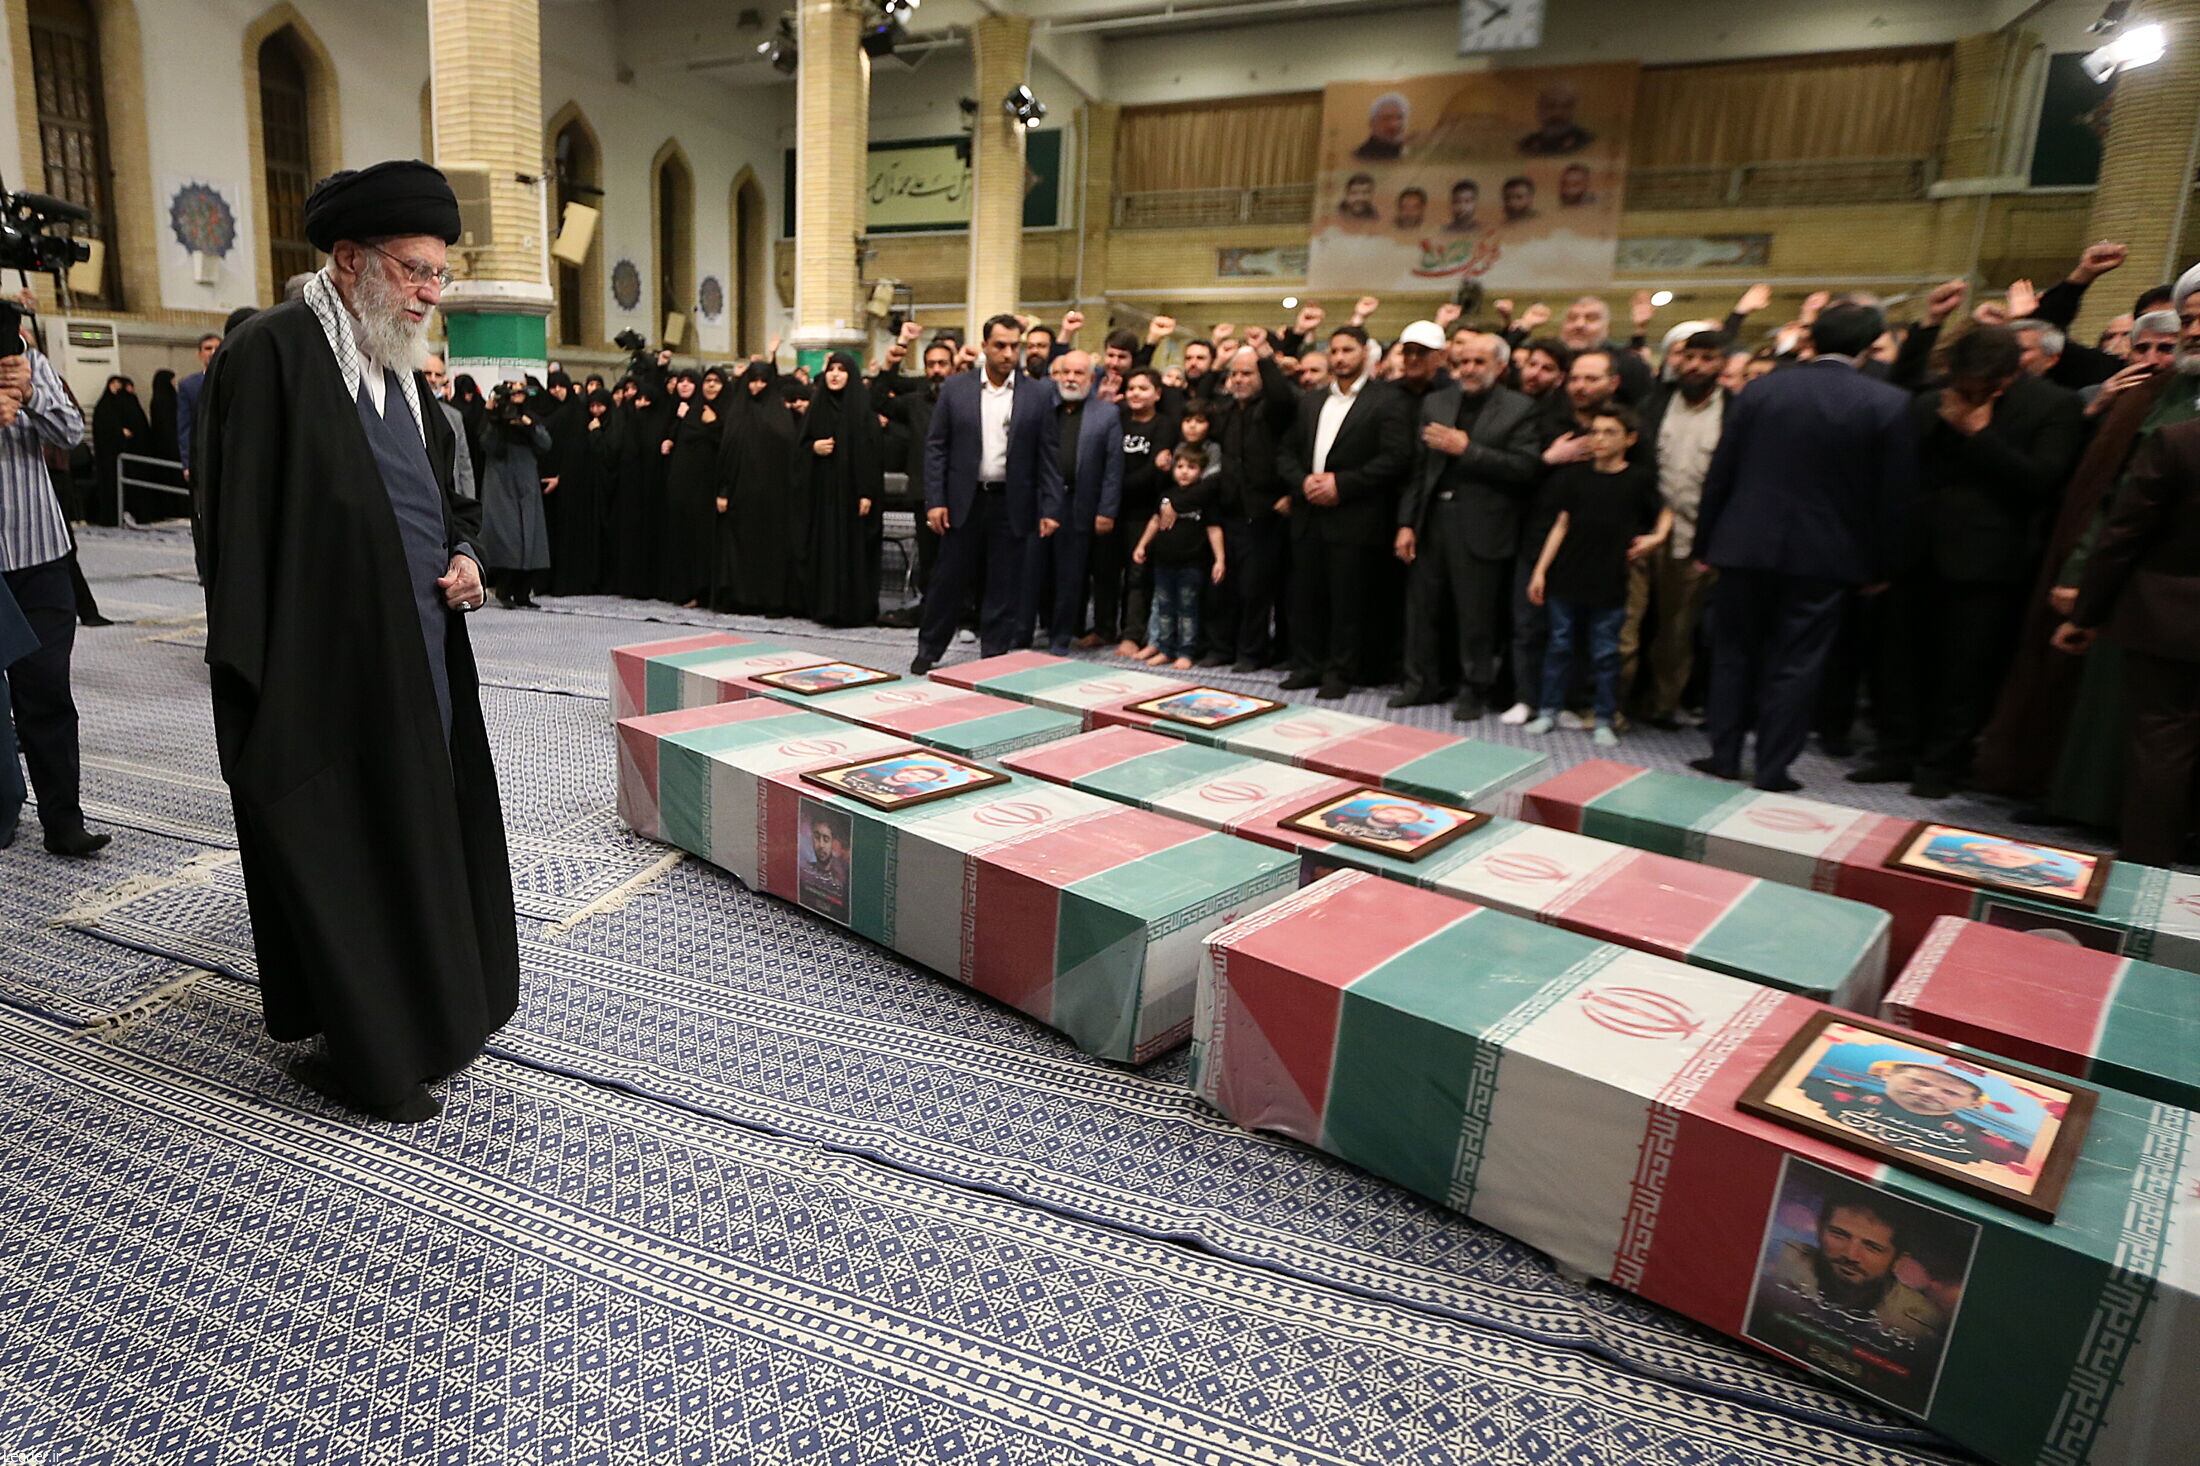 The supreme leader of Iran, Ayatollah Ali Khamenei, before the coffins of the seven members of the Revolutionary Guard killed in an Israeli bombing in Damascus.